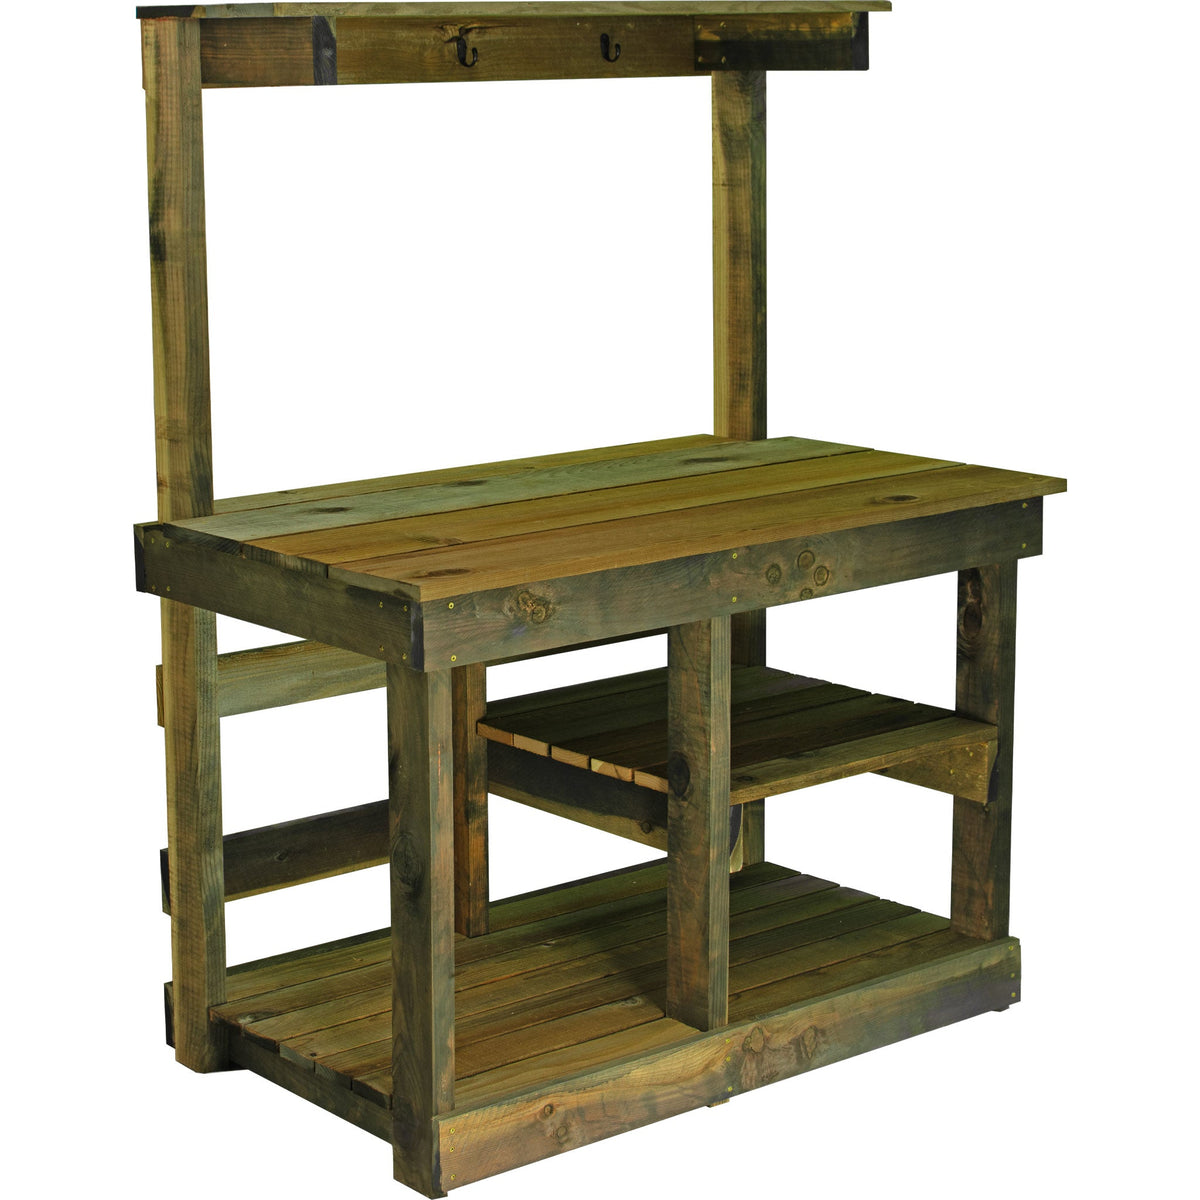 The side angle of the Rustic Gardening Workbench and Potting Table.  Natural Redwood Style Frame.